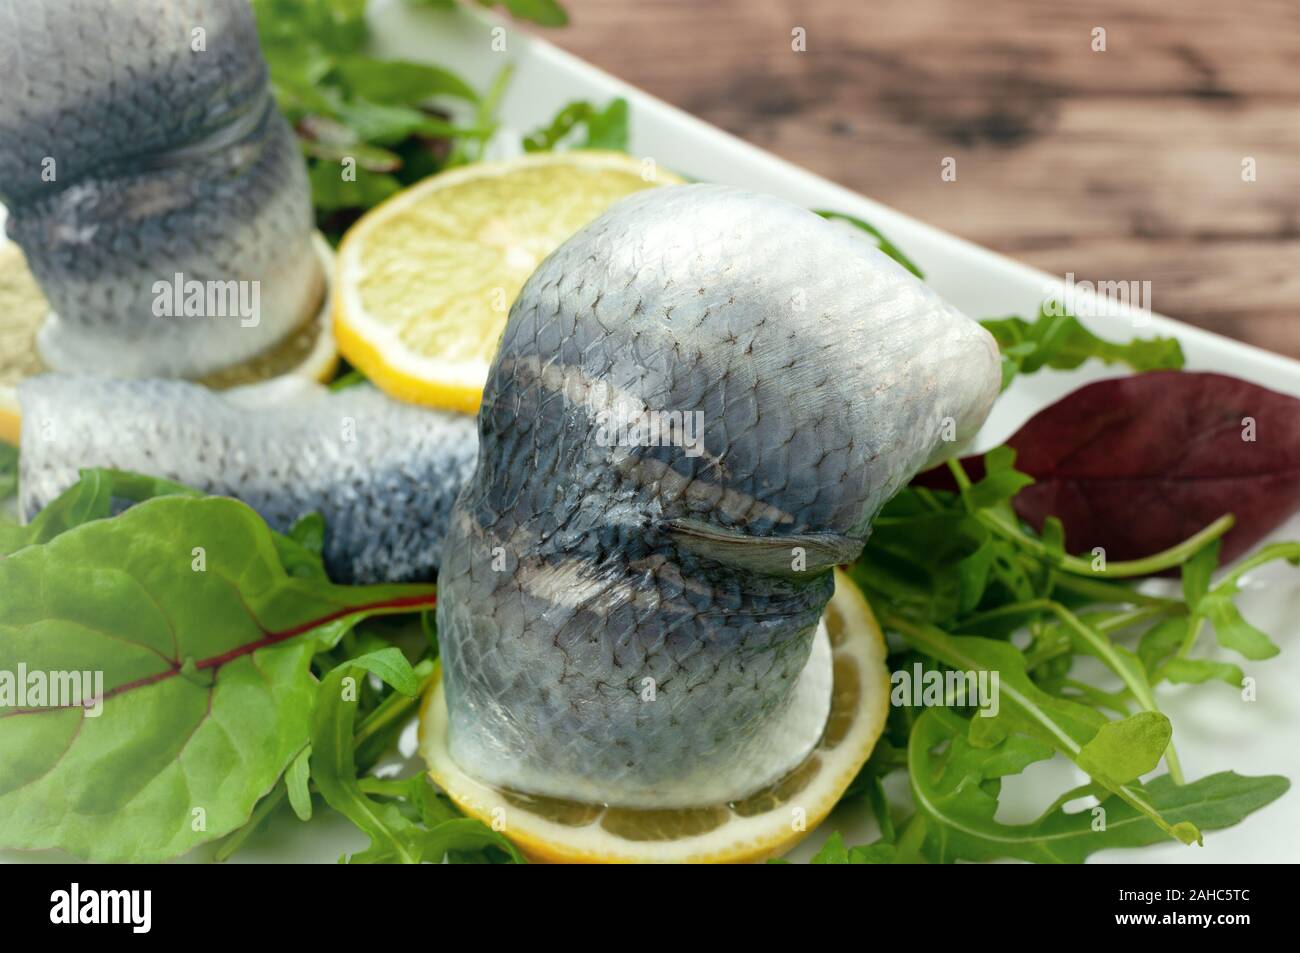 Pickled herring with mixed salad on wooden table Stock Photo